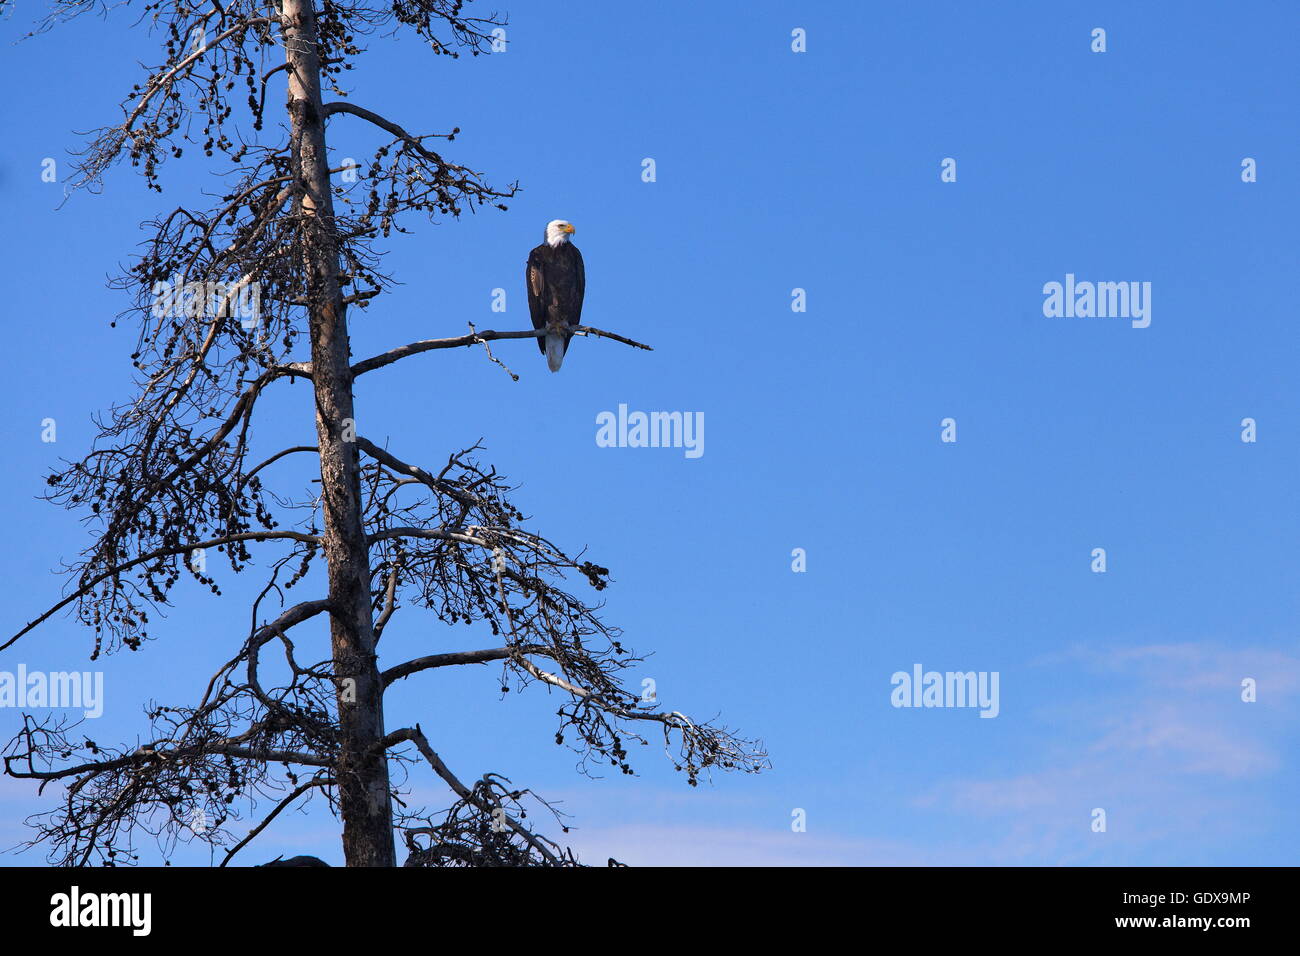 Zoologie/Tiere, Vogel/Vögeln (Aves), Weißkopfseeadler, Grand Teton National Park, Wyoming, USA, Additional-Rights - Clearance-Info - Not-Available Stockfoto